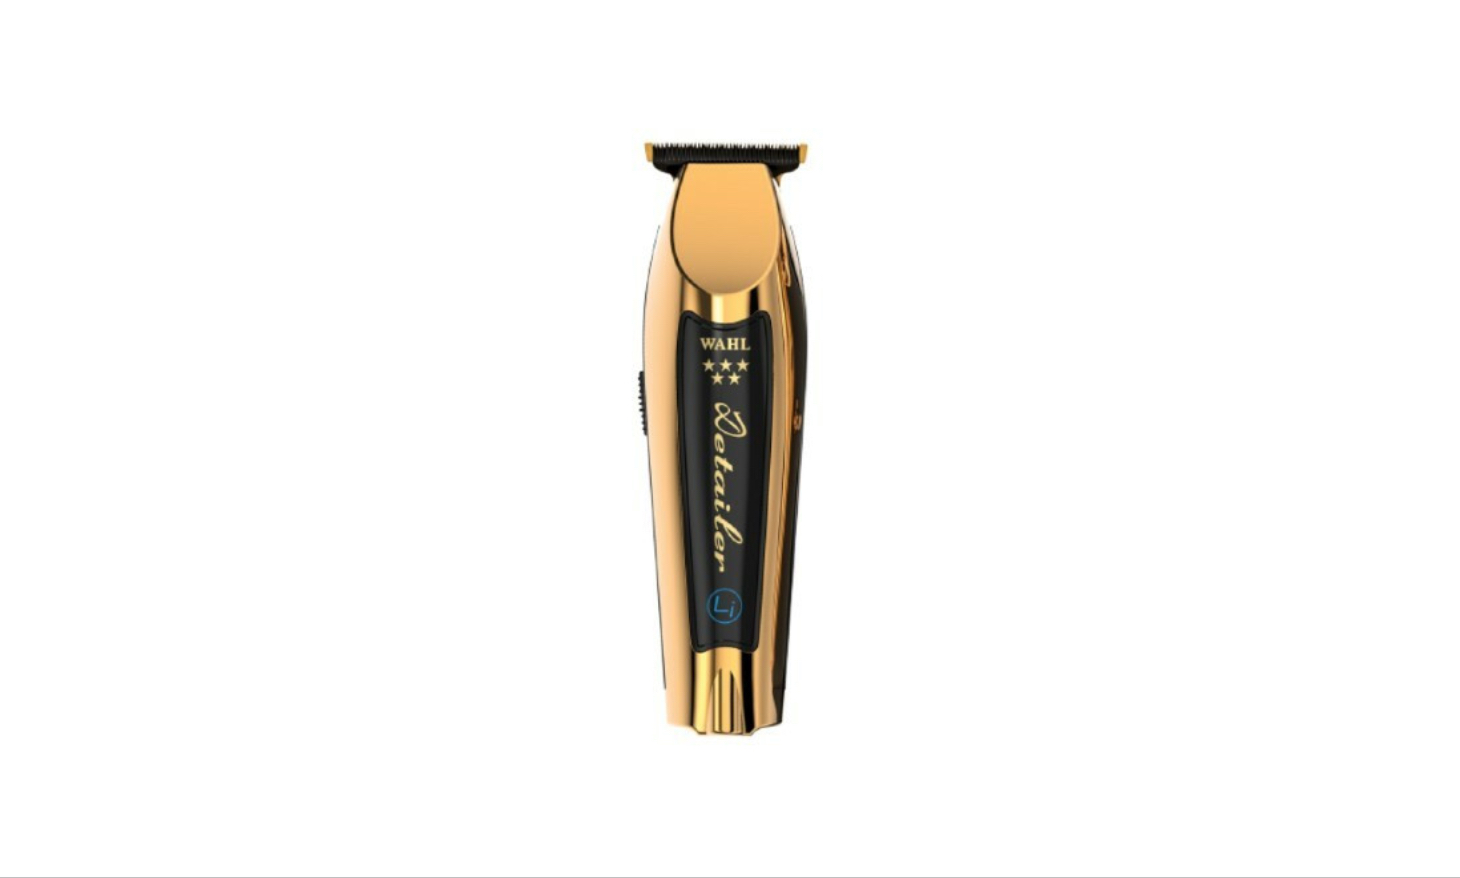 Wahl Professional® Releases 5 Star Gold Cordless Detailer® Li 